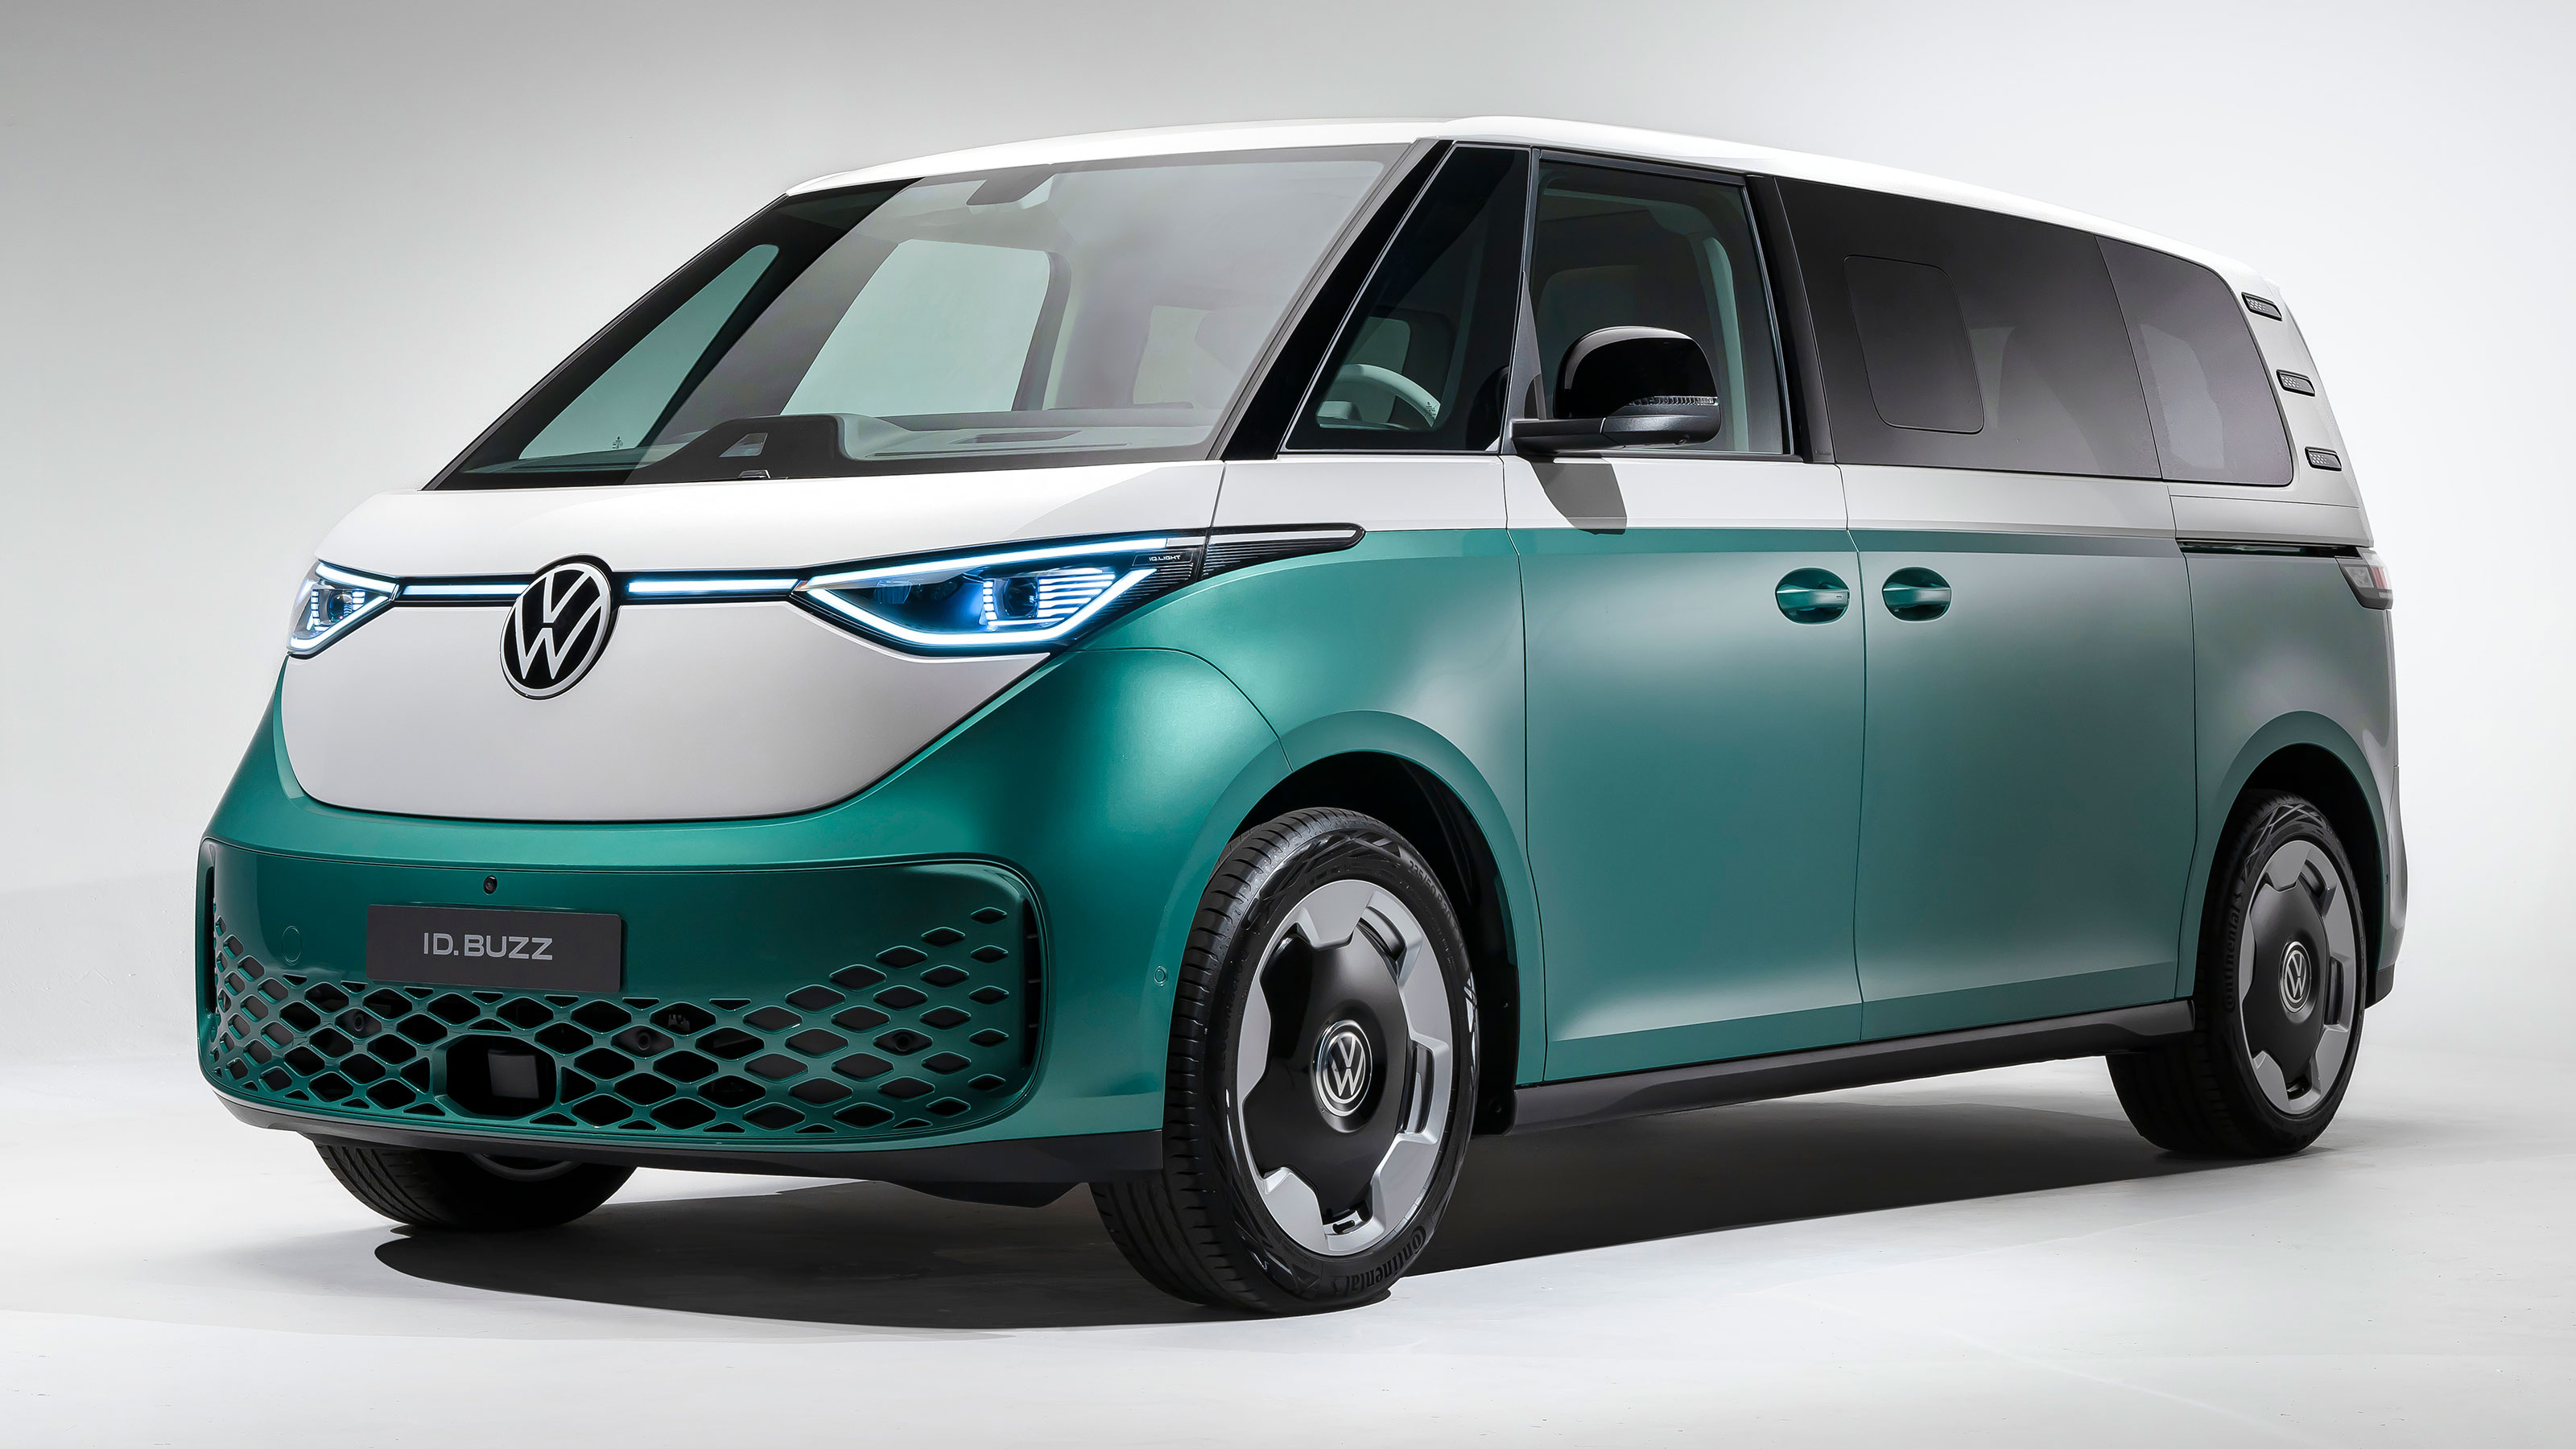 All we want from life is this electric VW bus